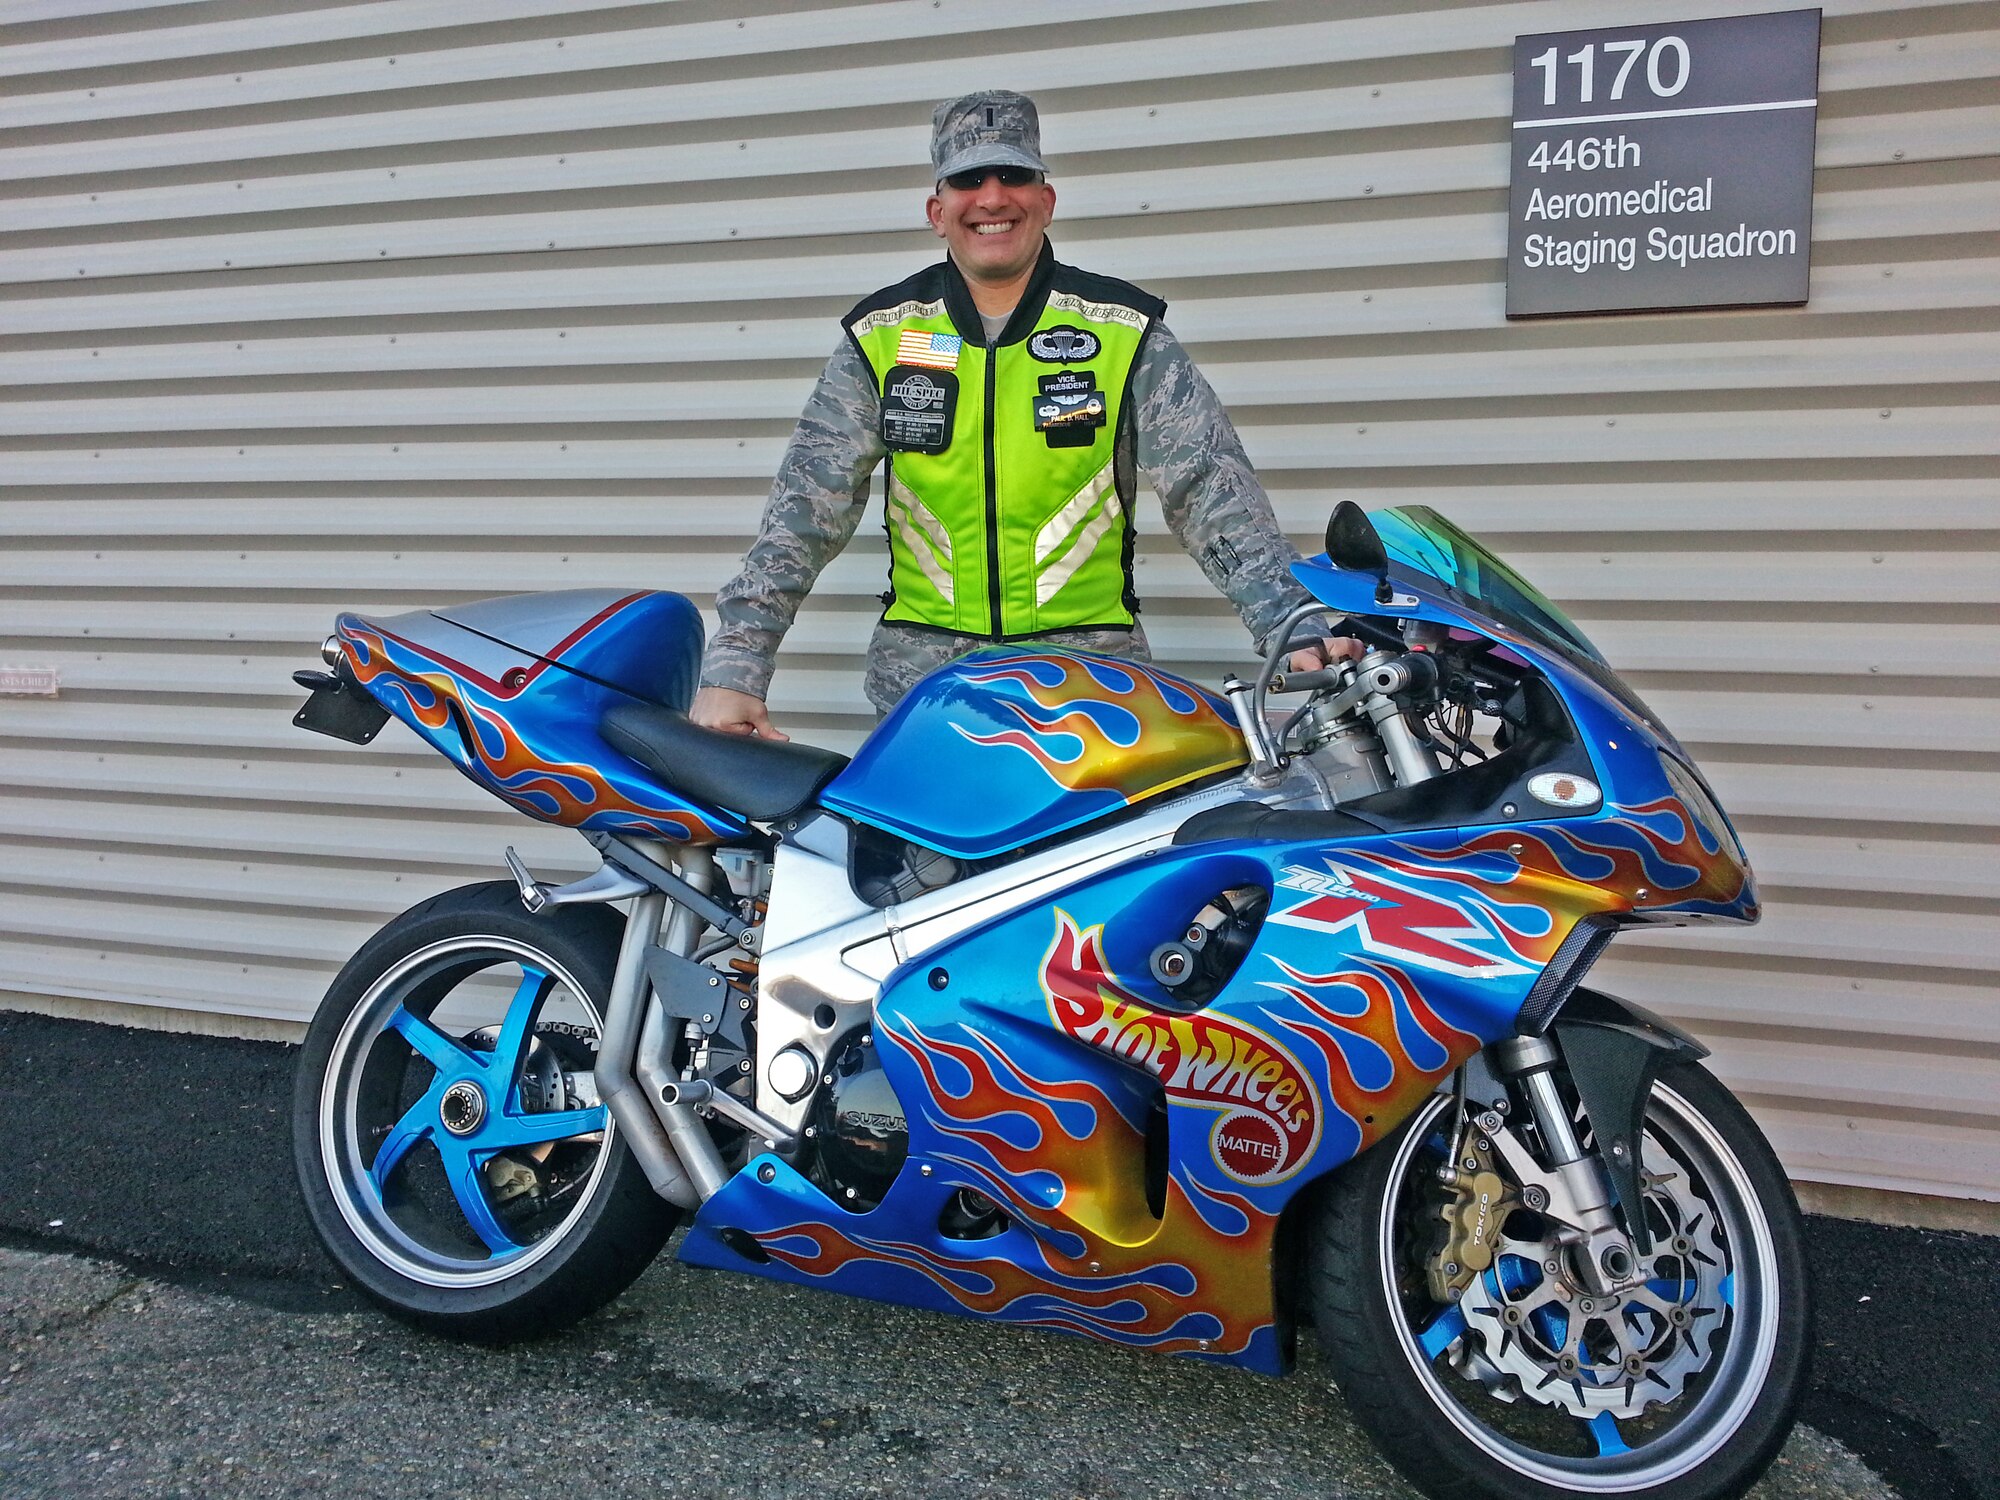 1st Lt. Paul Hall, Medical Readiness Deputy Flight Commander at the 446th Aeromedical Staging Squadron, stands with his 2000 Suzuki TL1000R outside of the 446th ASTS building on McChord Field. Hall is in a motorcycle riding club called "Wings on Wheels" with other members of the unit. (Courtesy photo)